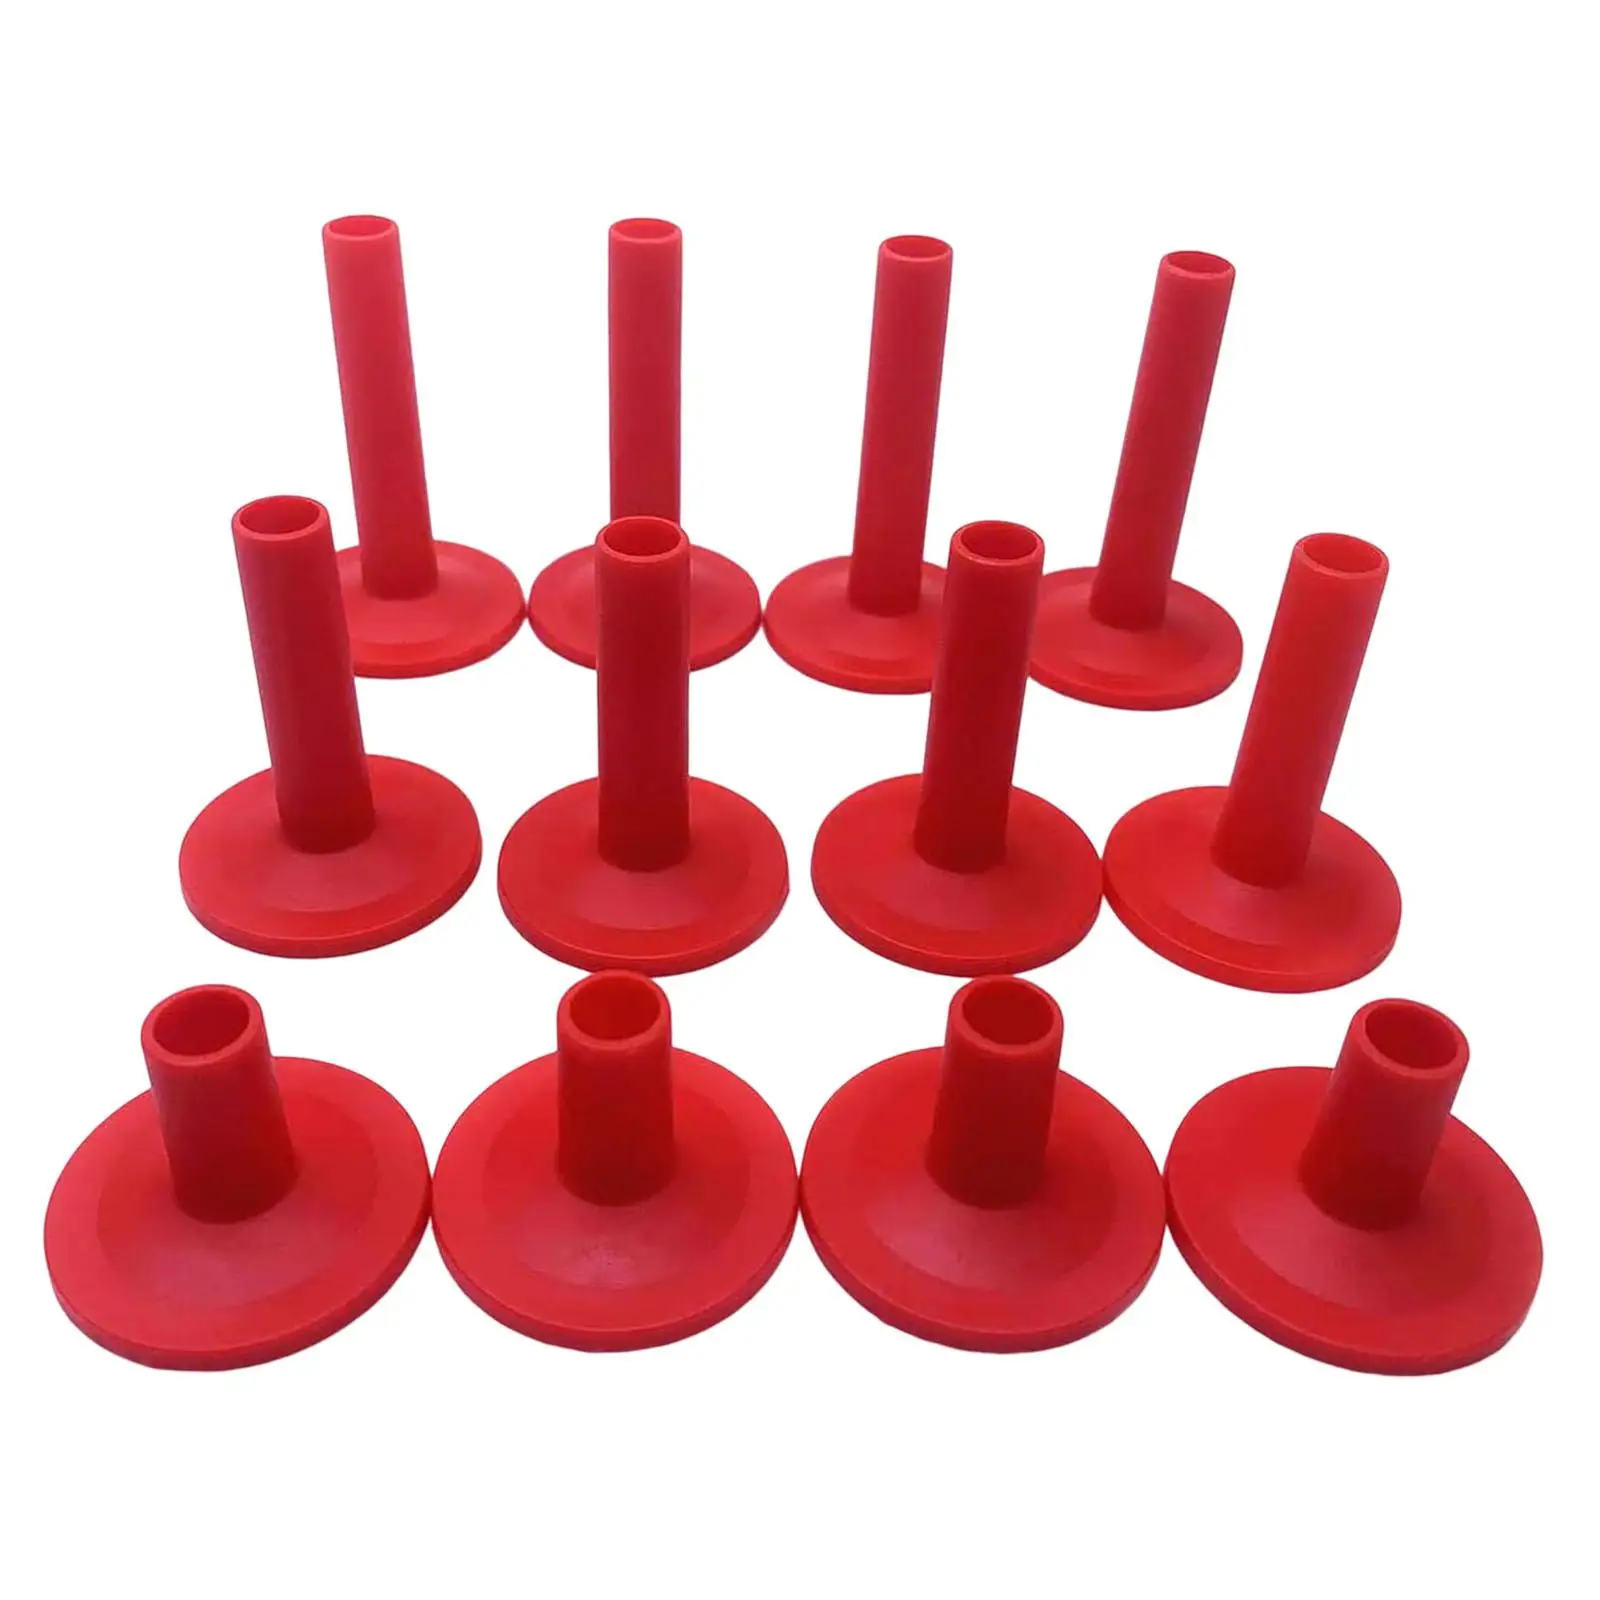 12 Pcs Durable Cymbal Sleeves Long Medium Short Flanged Drum Percussion Accessories Flexible Casing Pipe Tool for Shelf Drum Kit